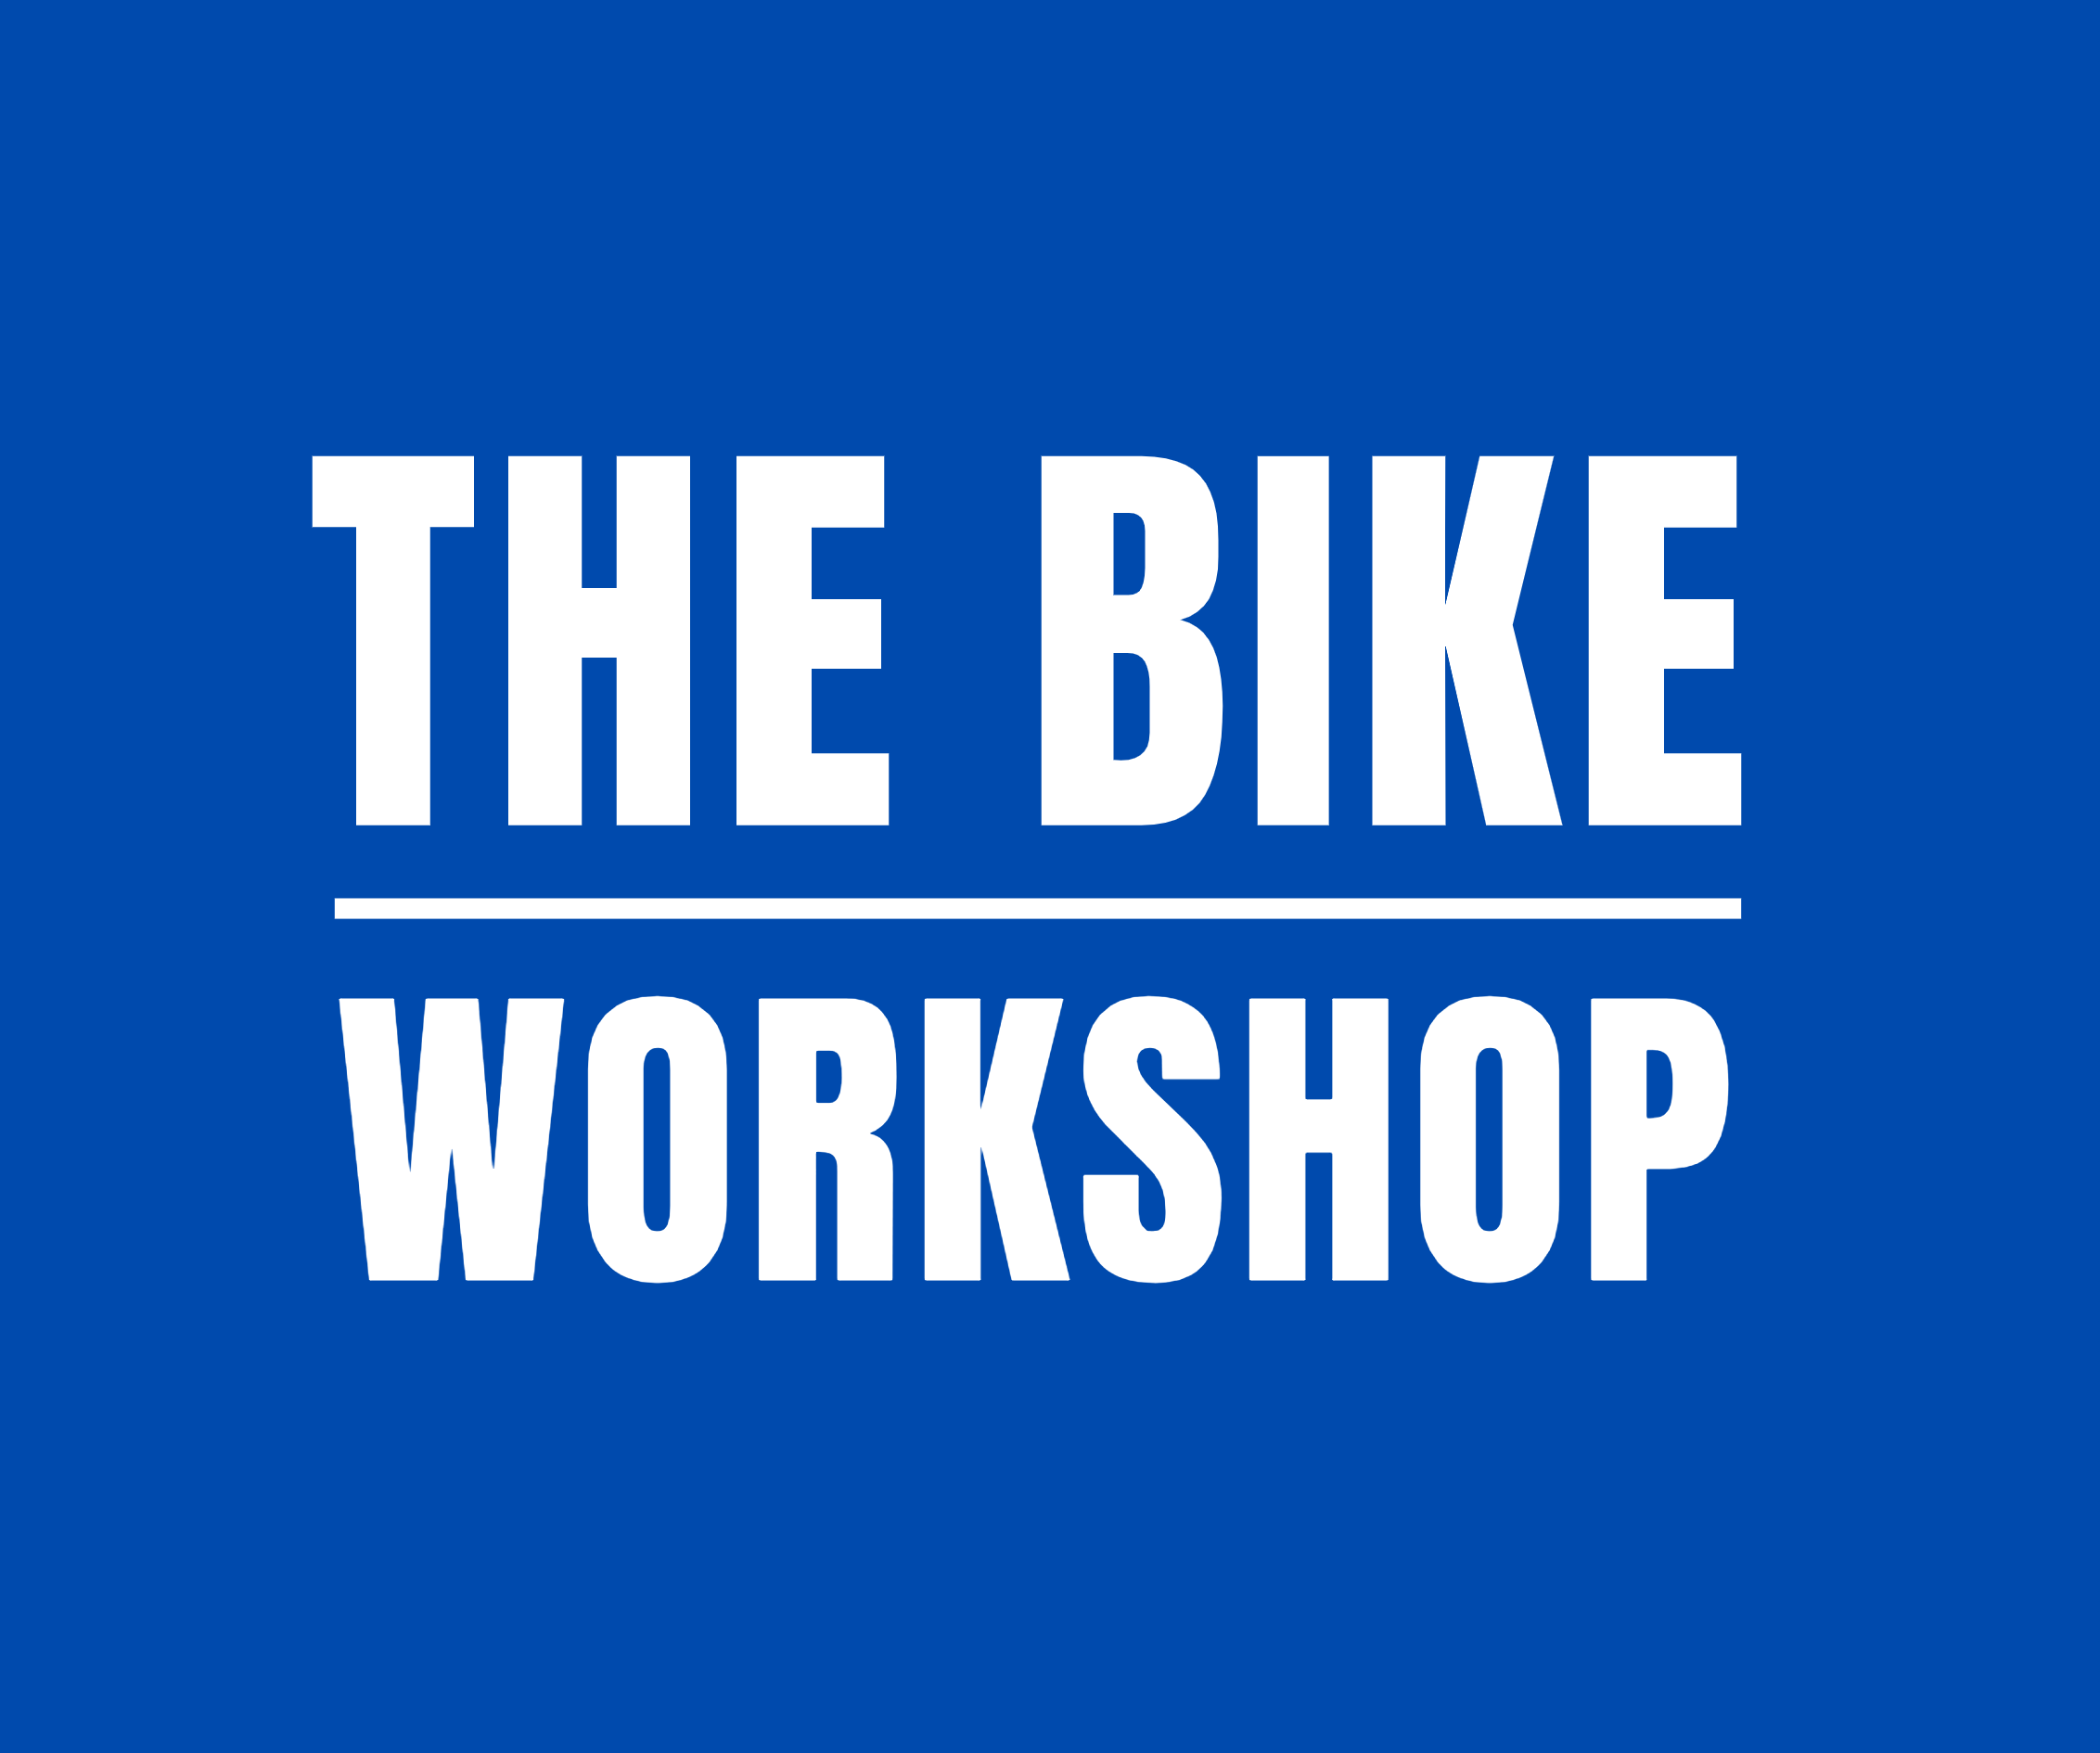 The Bike Workshop, Manchester Cycling Academy CIC - is using www.repero.me, a repair shop software